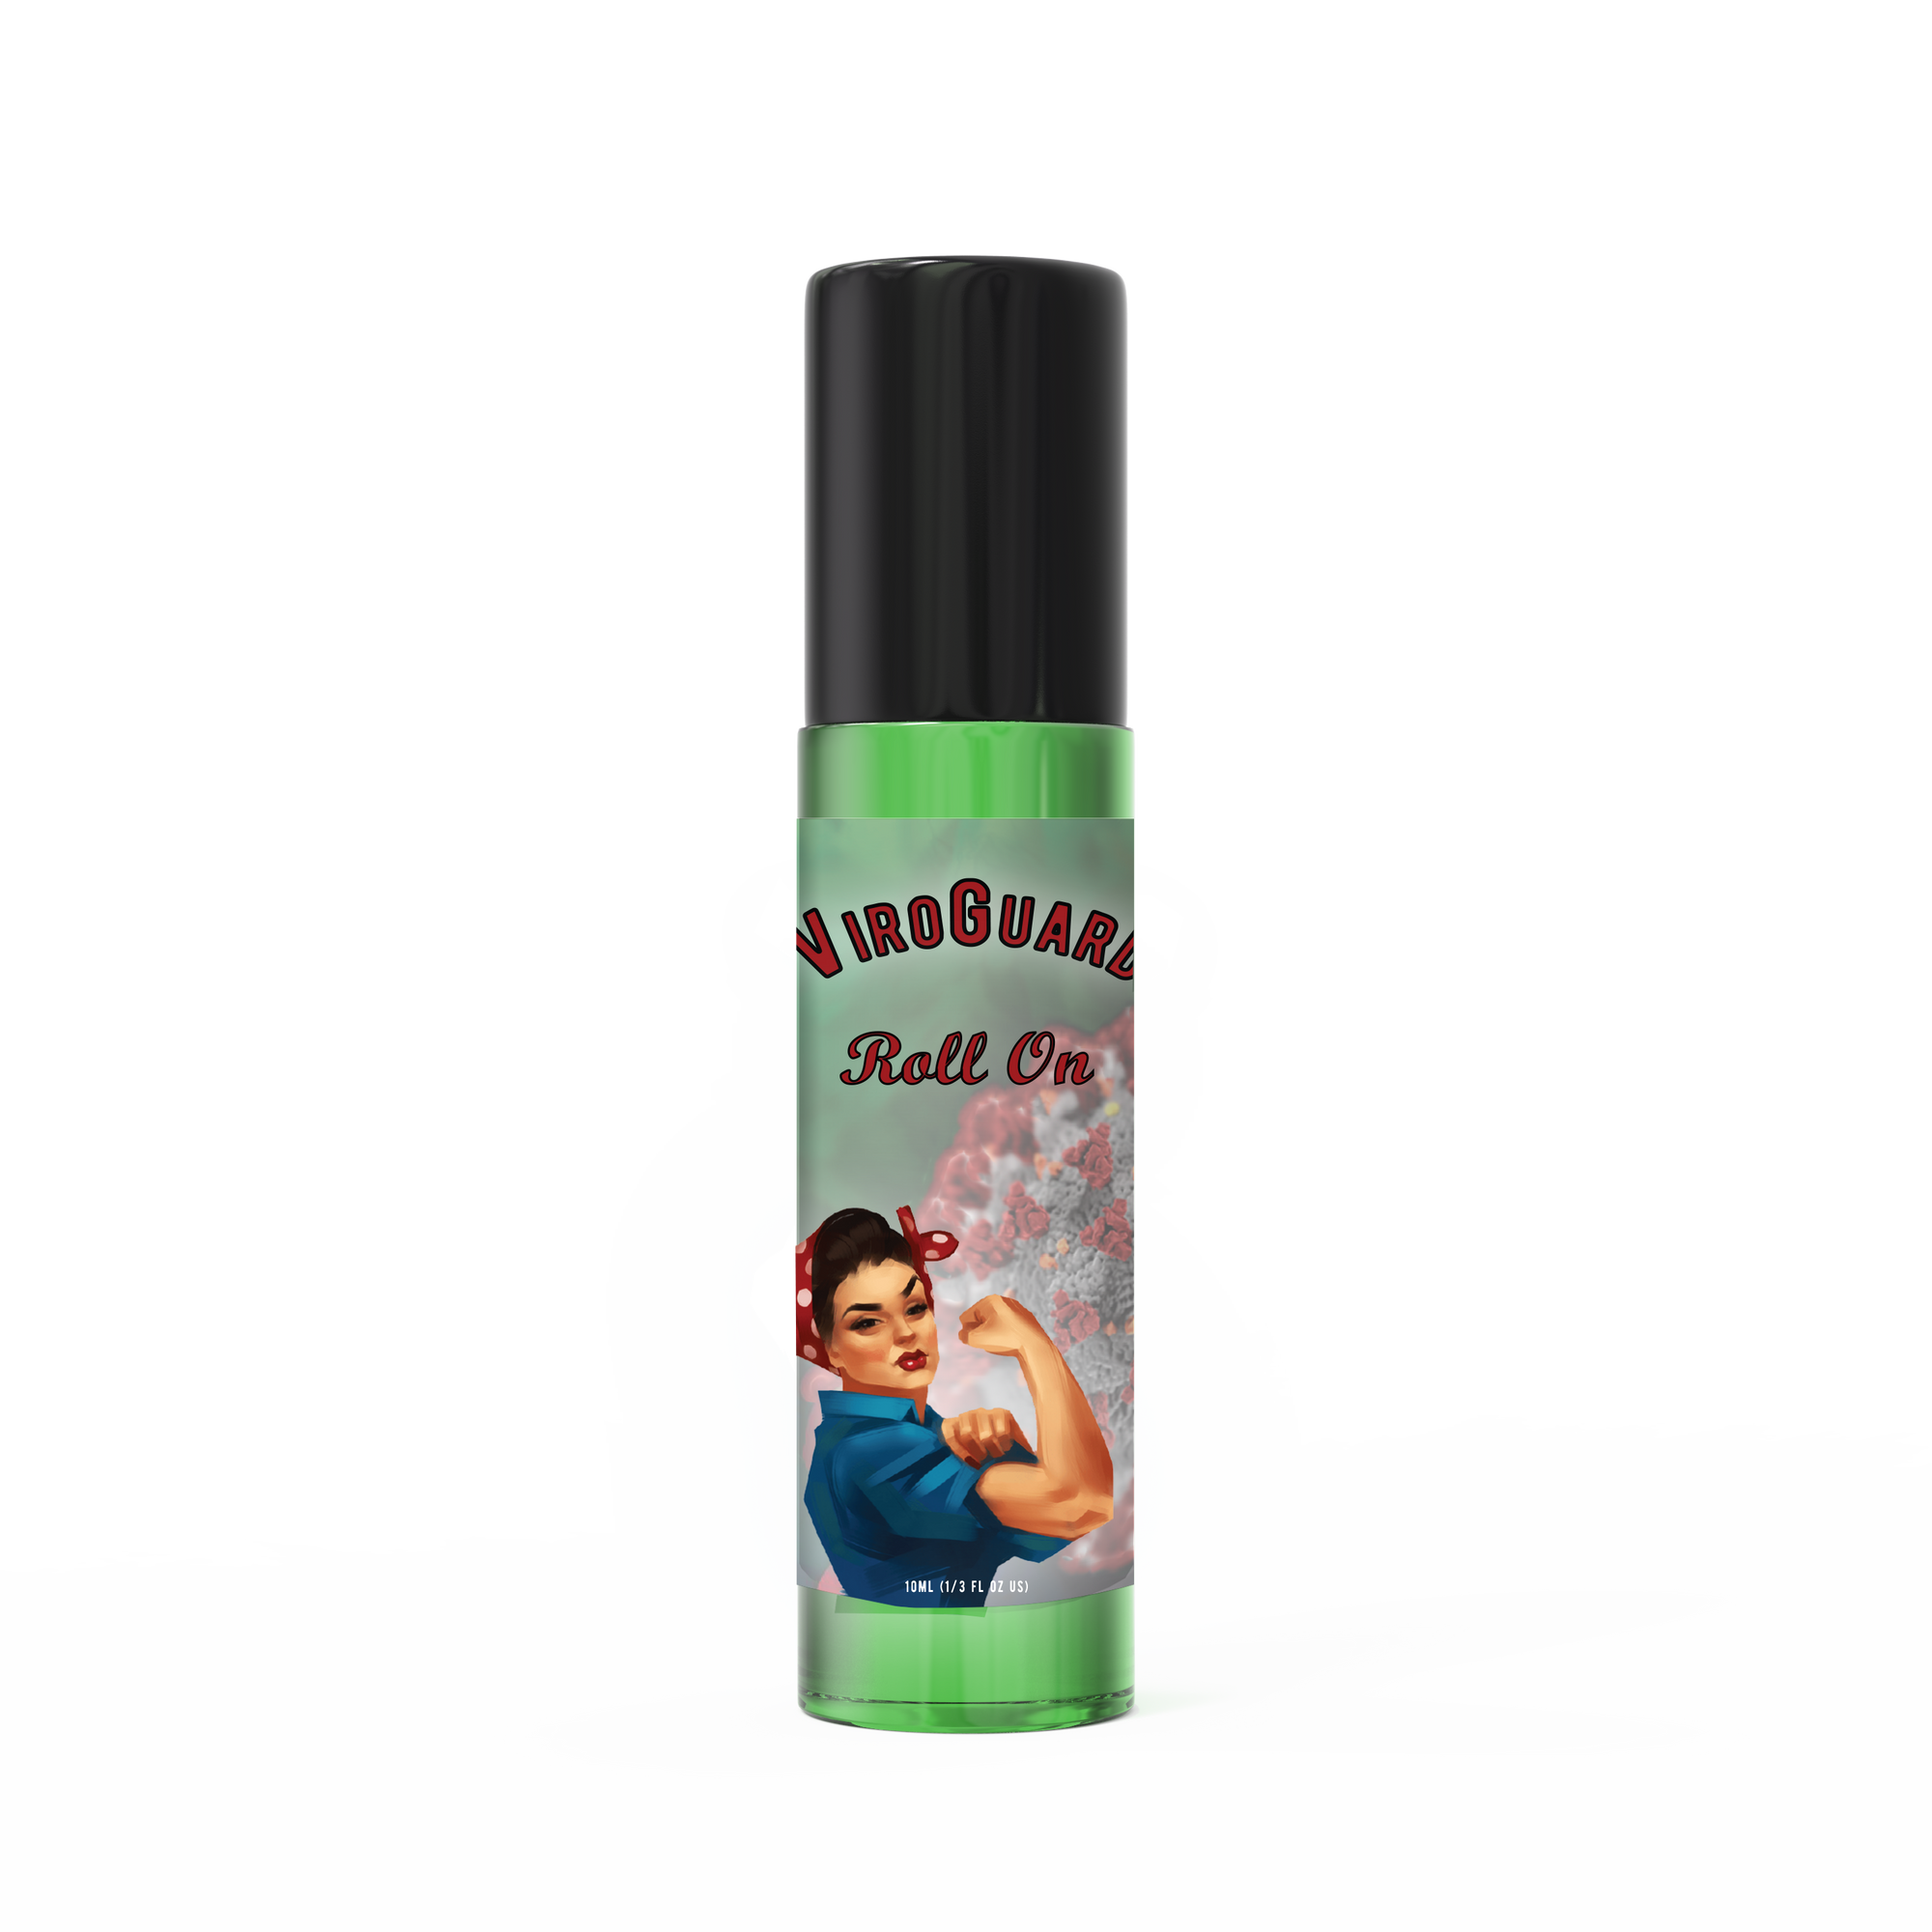 ViroGuard Roll On | Medicine Flower | Raw Living UK | Health | Anti-Viral | Medicine Flower ViroGuard Aroma Roll-On Oil Blend is made with pure essential oils. Use this roll-on topically to defend against harmful bacteria & viruses.